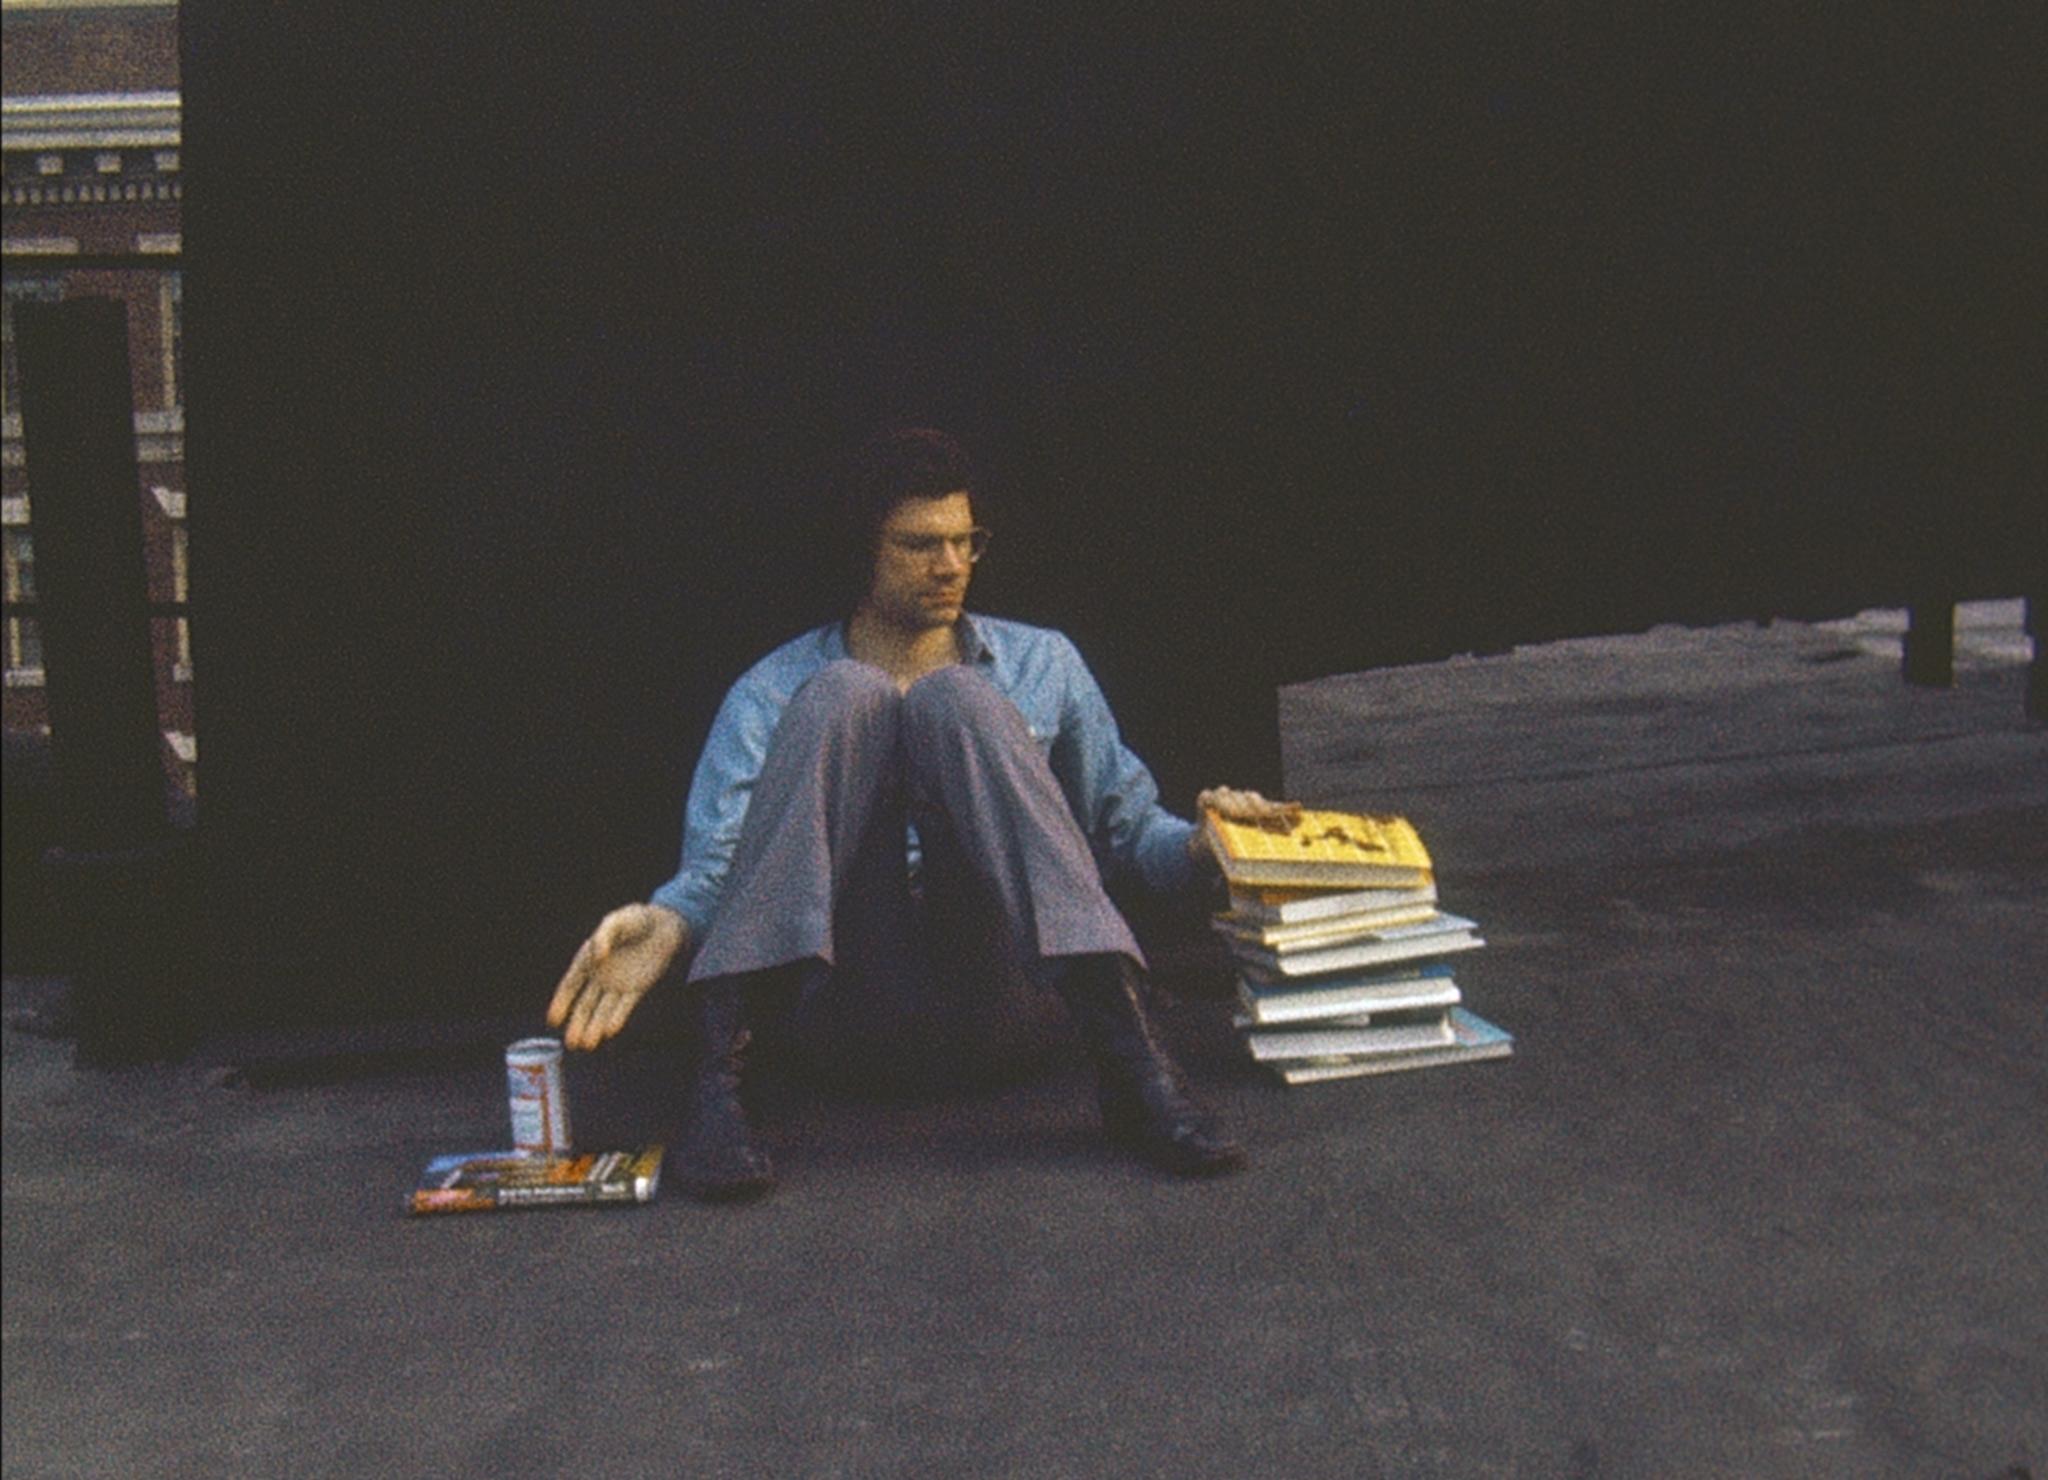 person sitting on the ground on a rooftop with a large pile of books beside them